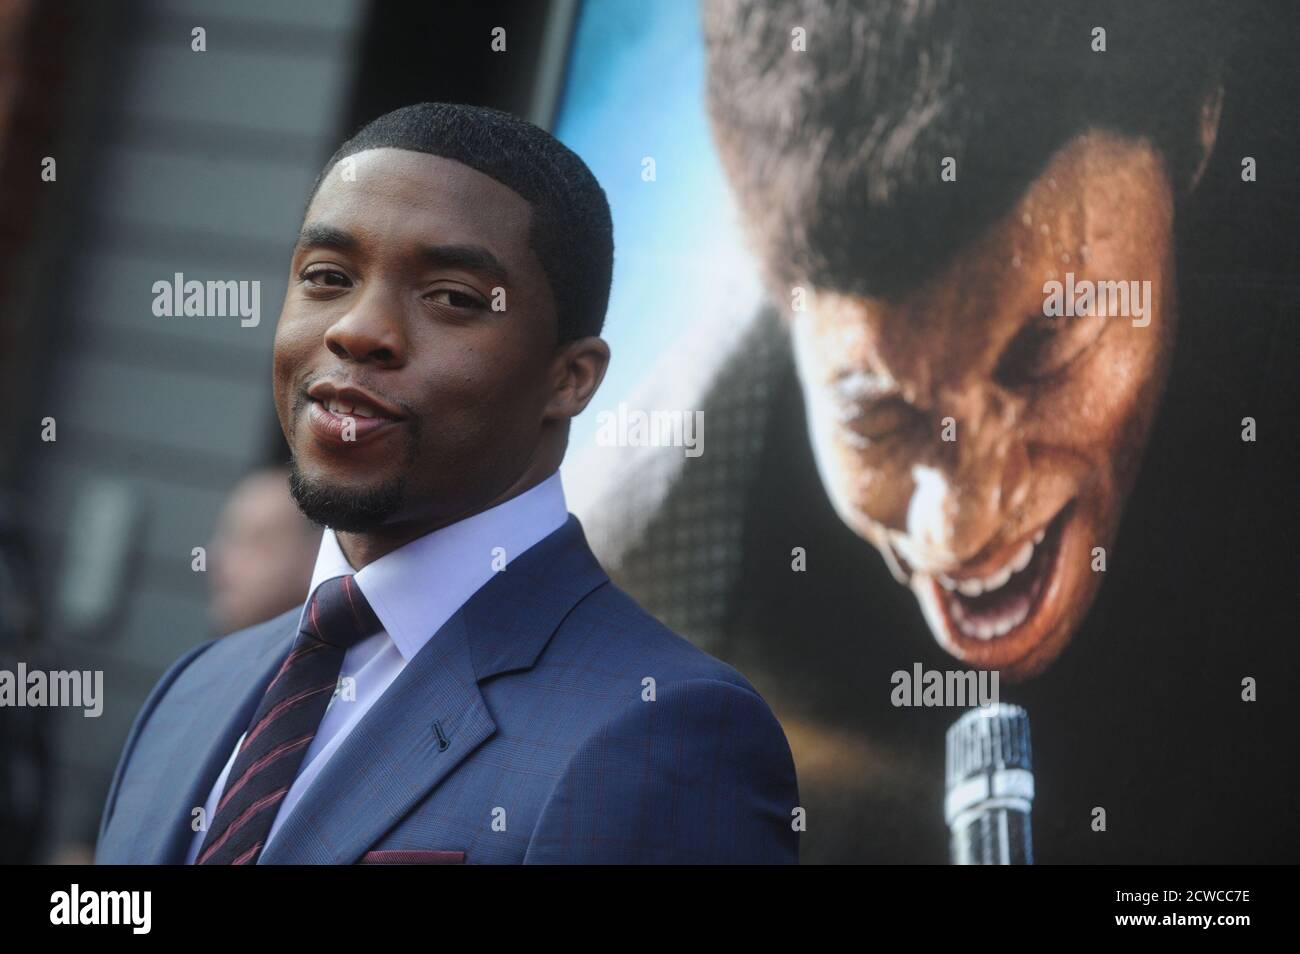 NEW YORK, NY - JULY 21: Chadwick Boseman attends the 'Get On Up' premiere at The Apollo Theater on July 21, 2014 in New York City  People:  Chadwick Boseman Stock Photo